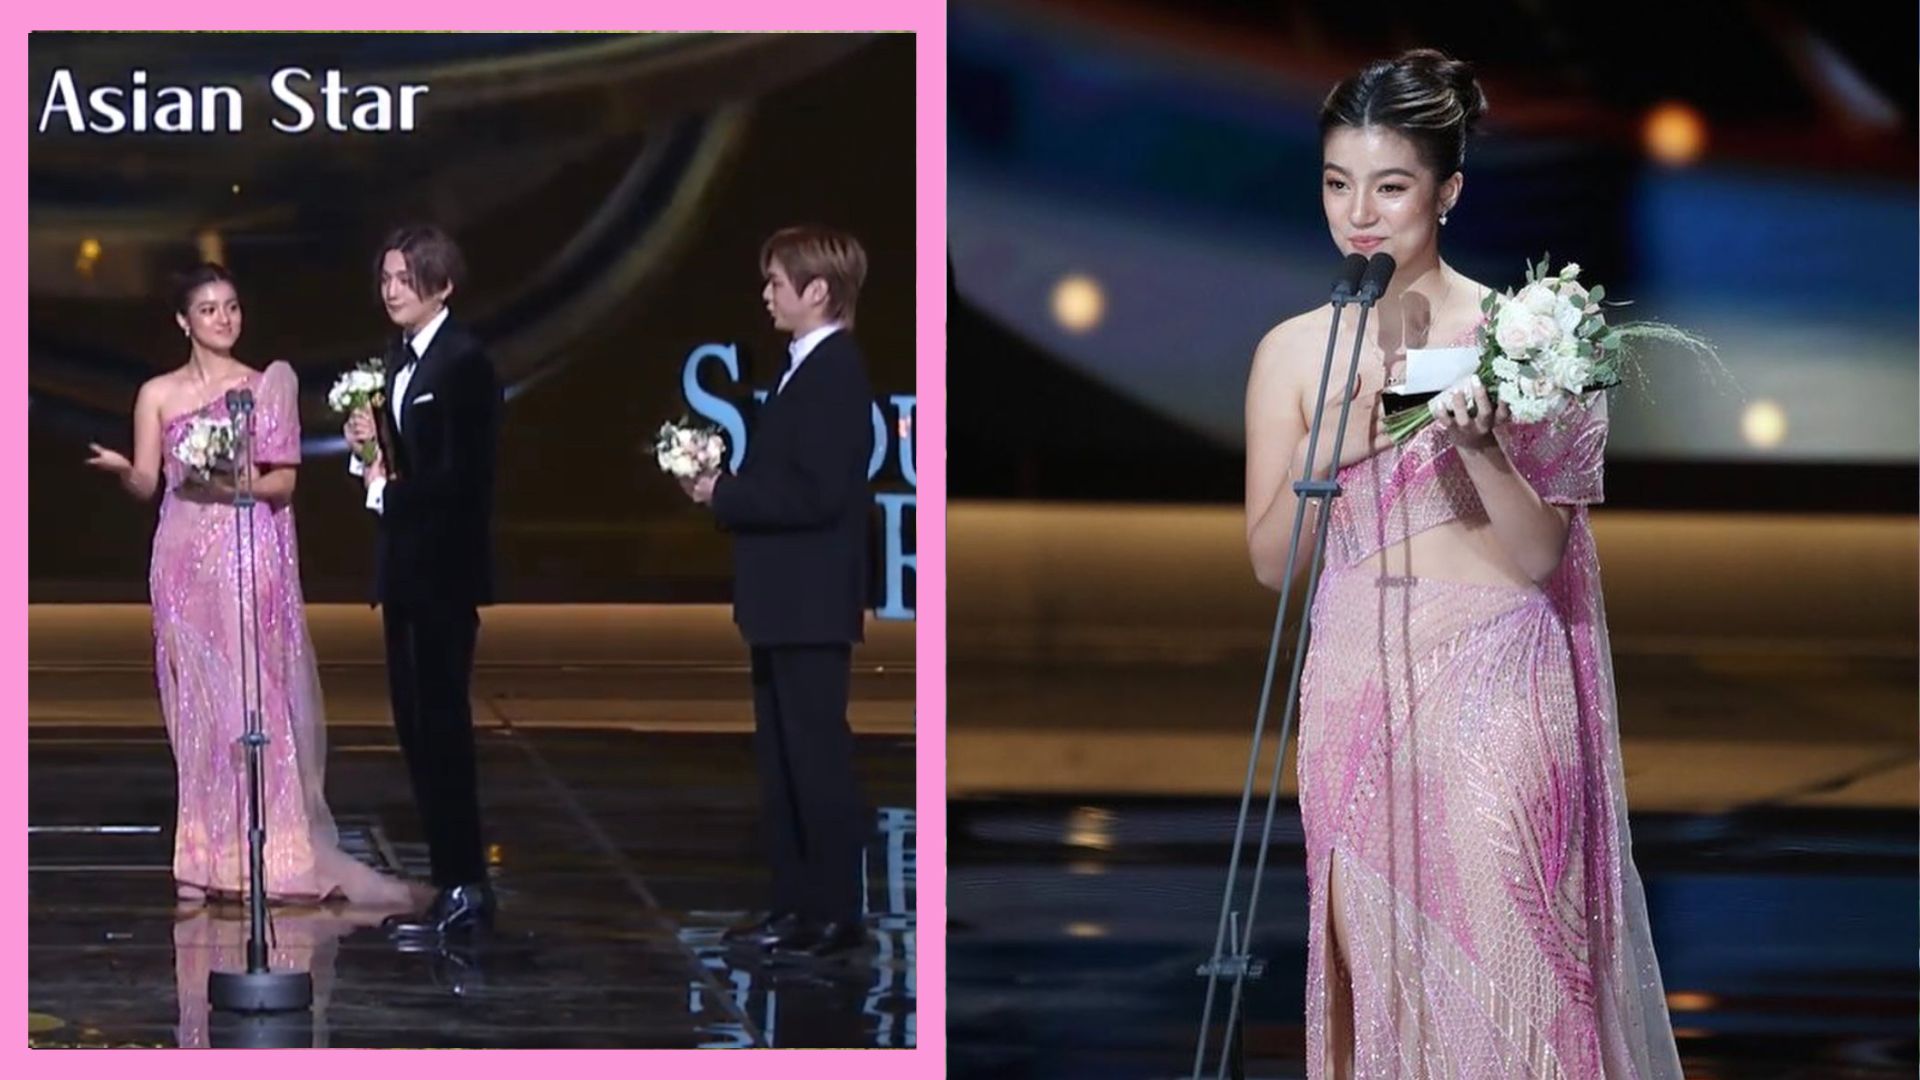 Belle Mariano Had the Cutest Interaction with Kang Daniel at Seoul International Drama Awards